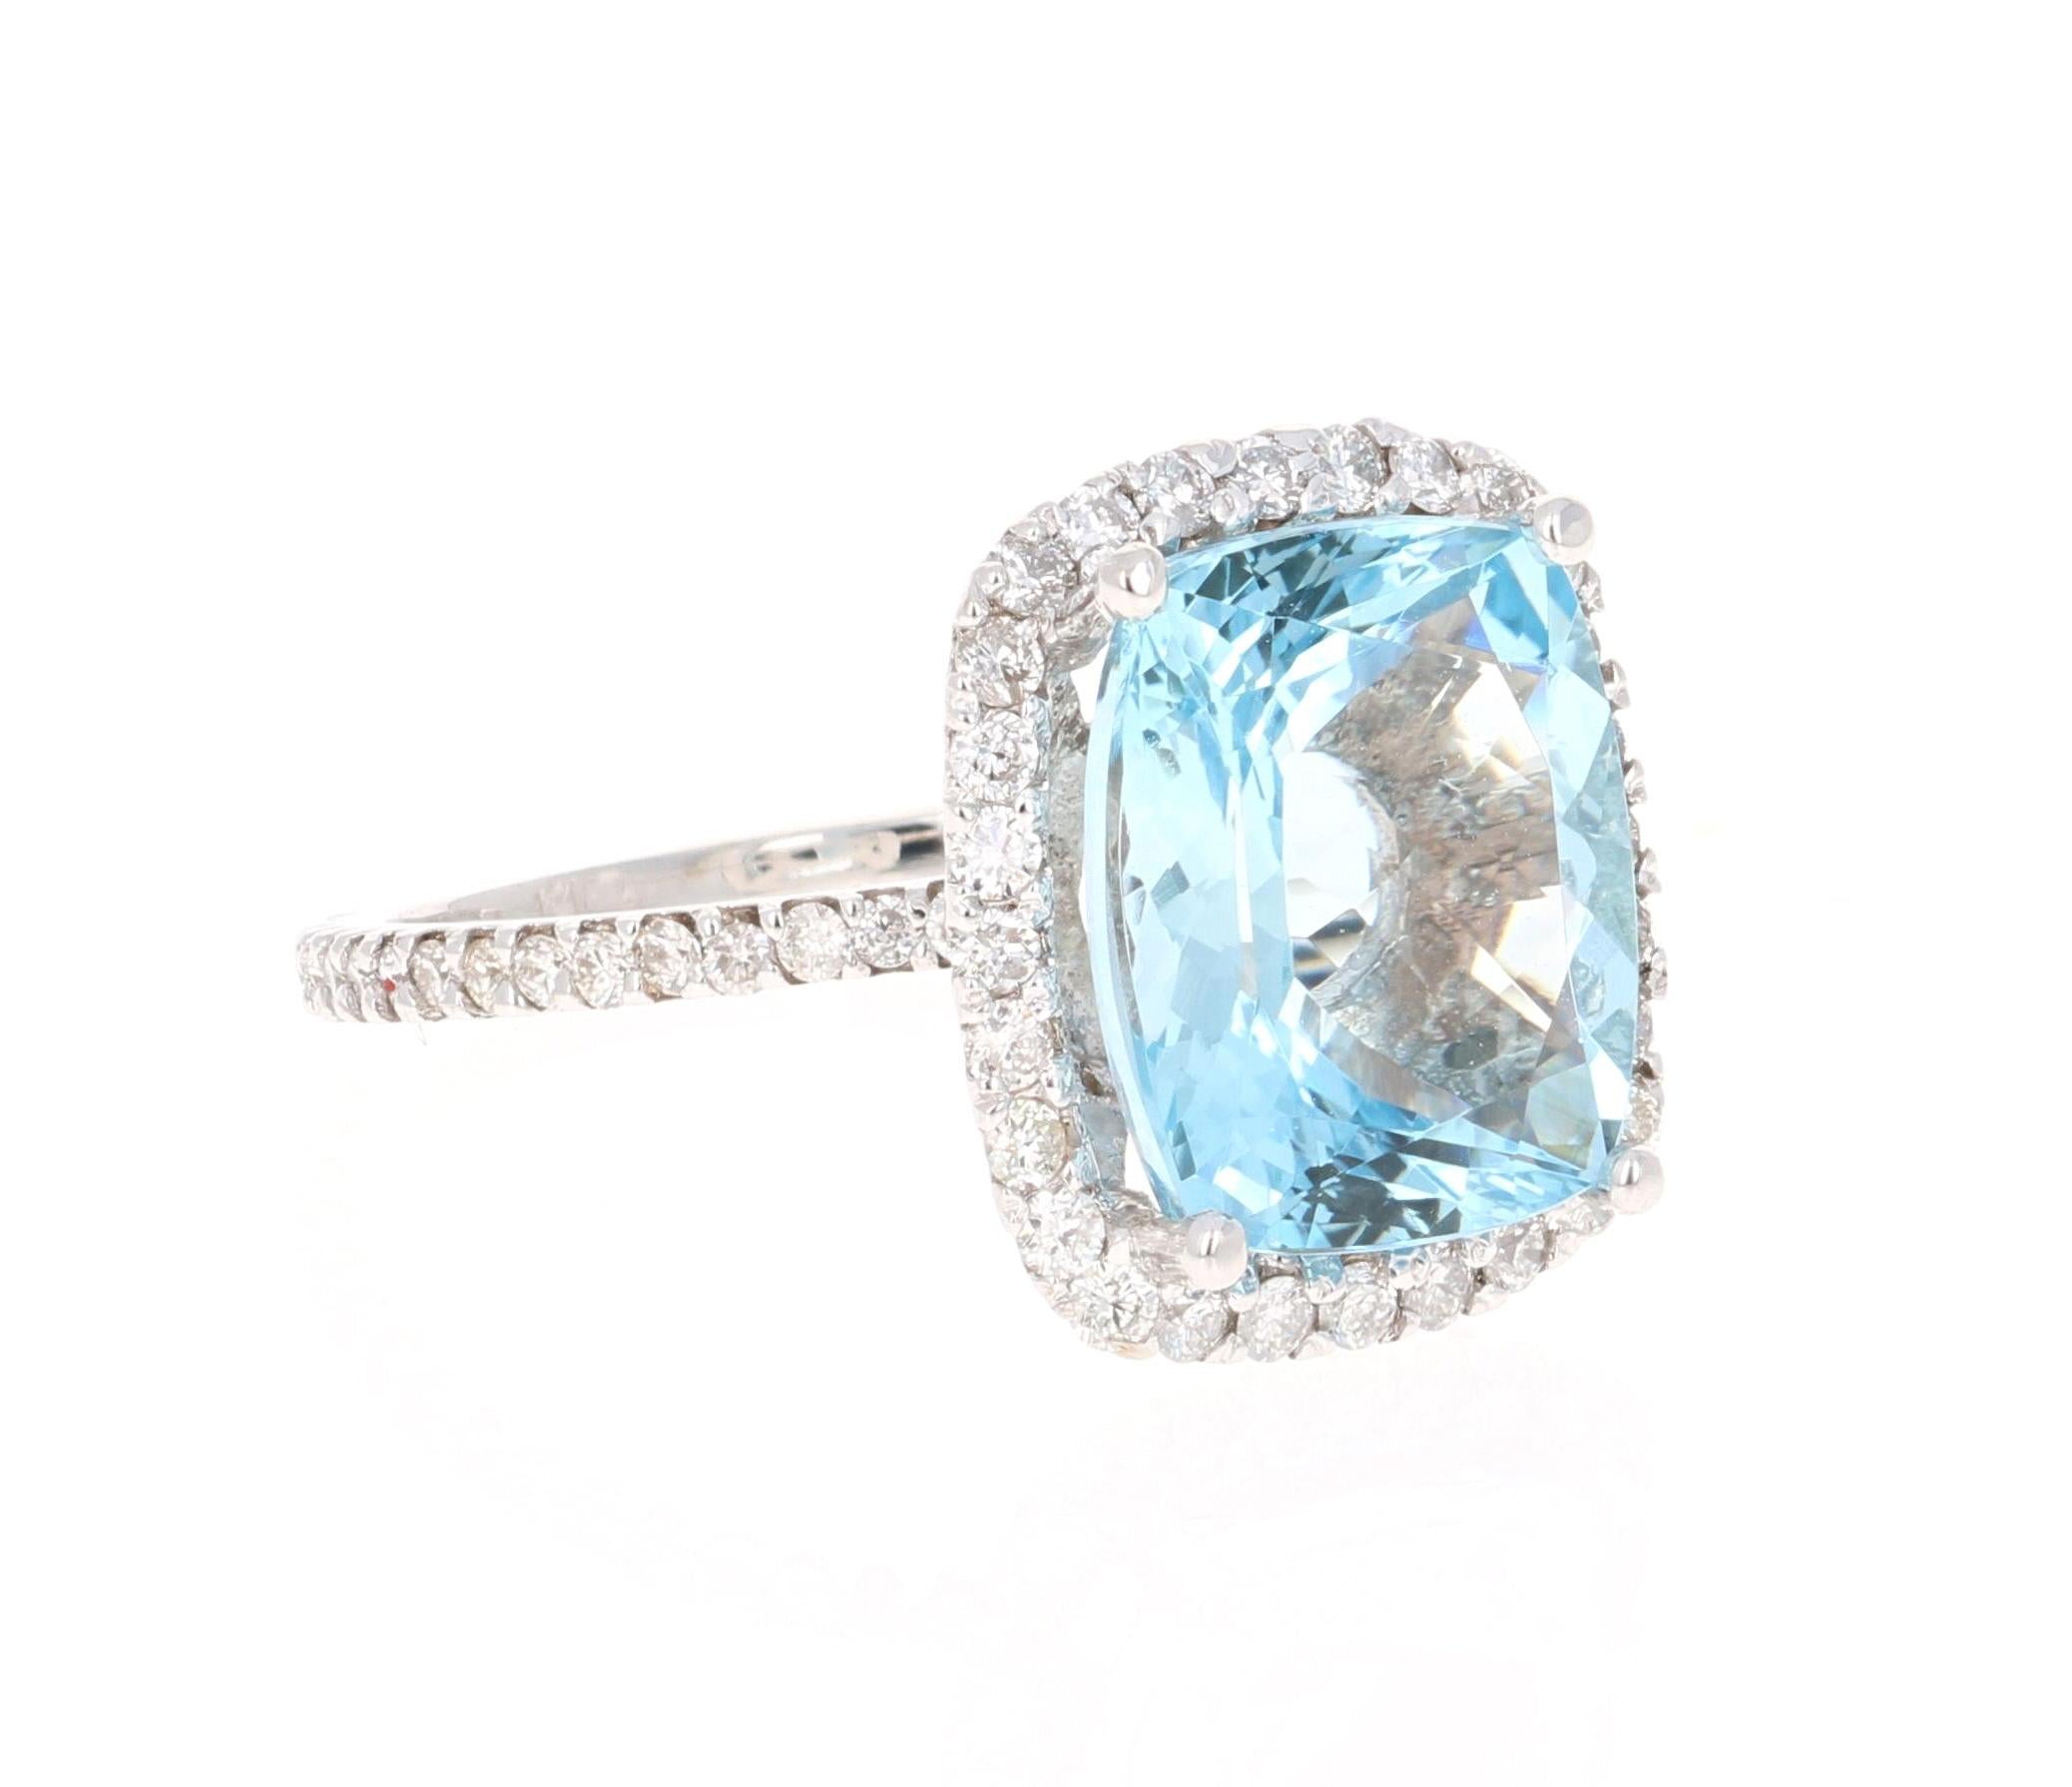 Can be a gorgeous Engagement Ring, Birthday or Anniversary Ring or simply a stunning everyday Ring! 

This ring has a gorgeous 5.41 Carat Cushion Cut Aquamarine and is surrounded by 60 Round Brilliant Cut Diamonds that weigh 0.71 Carats. The Total